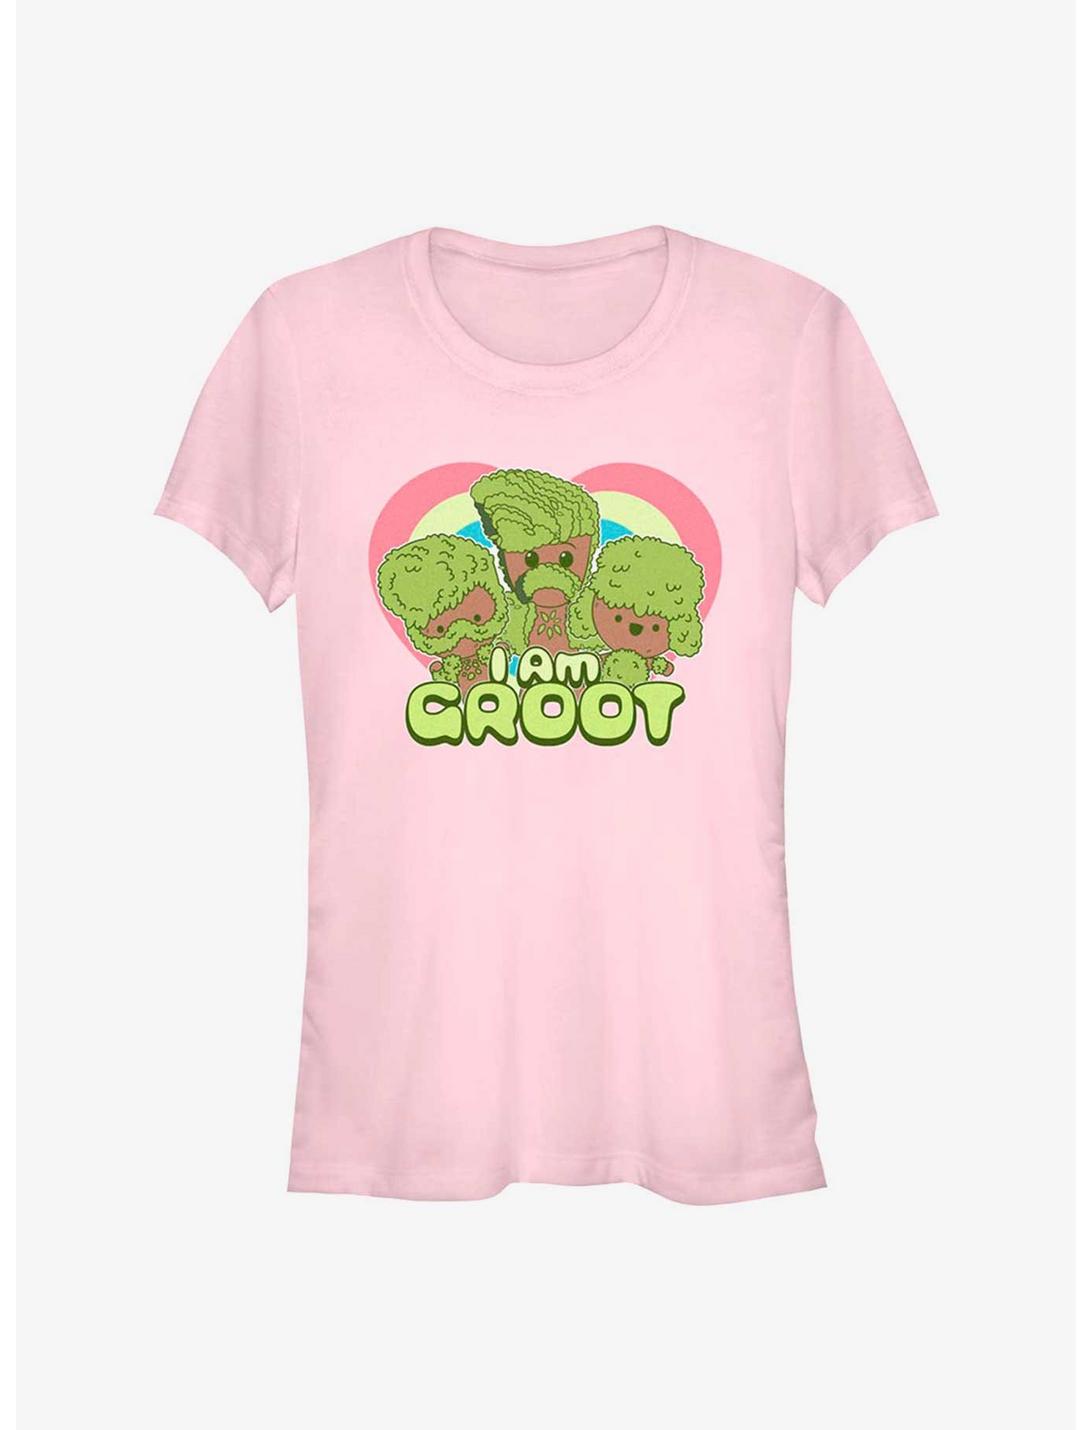 Marvel Guardians of the Galaxy Groot Hearts Girls T-Shirt, LIGHT PINK, hi-res